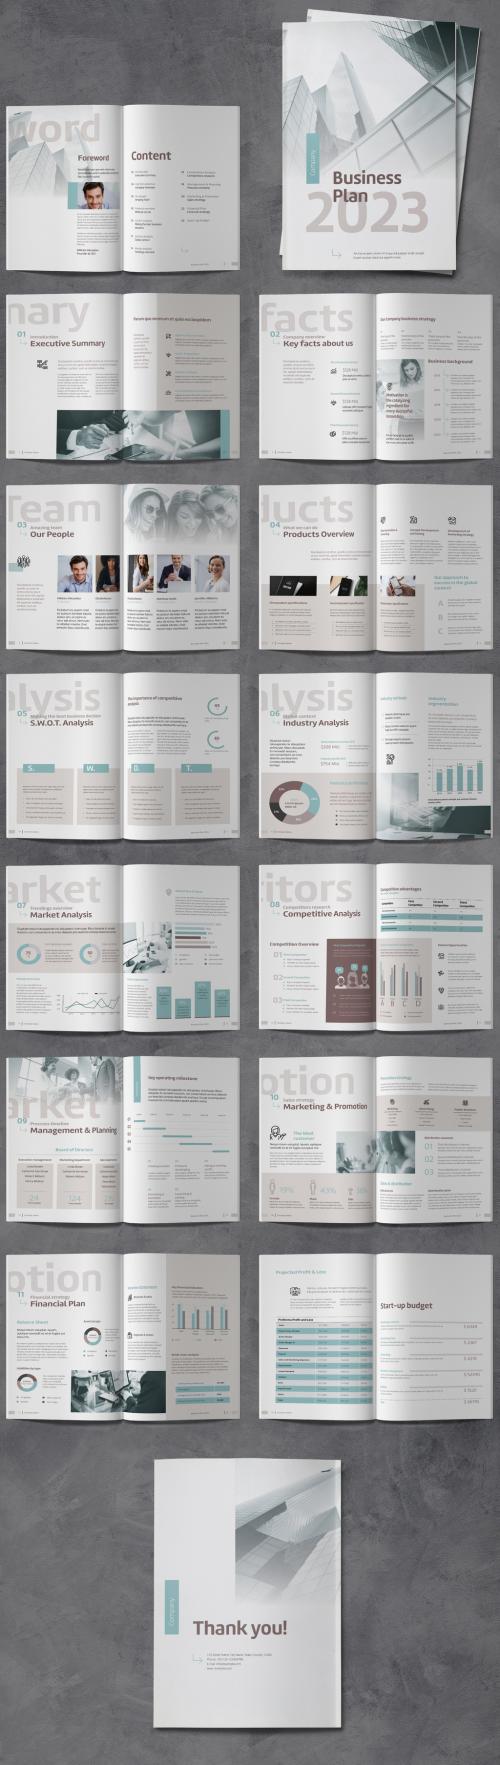 Business Plan Brochure with Brown and Blue Accents - 442796520